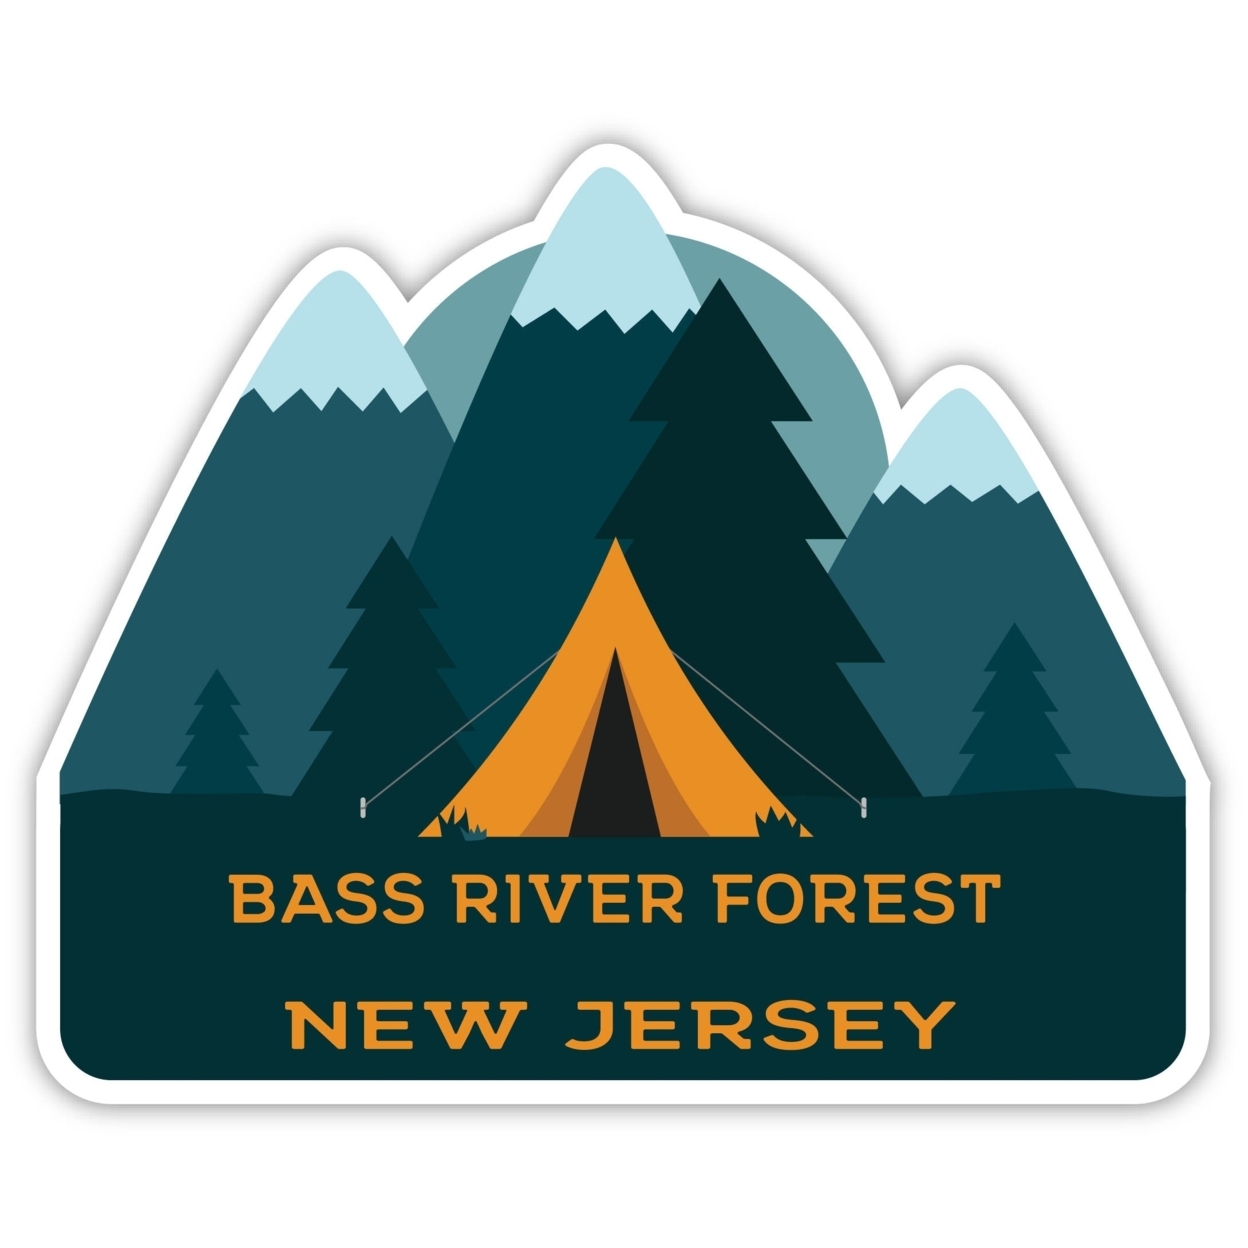 Bass River Forest New Jersey Souvenir Decorative Stickers (Choose Theme And Size) - 4-Pack, 8-Inch, Tent